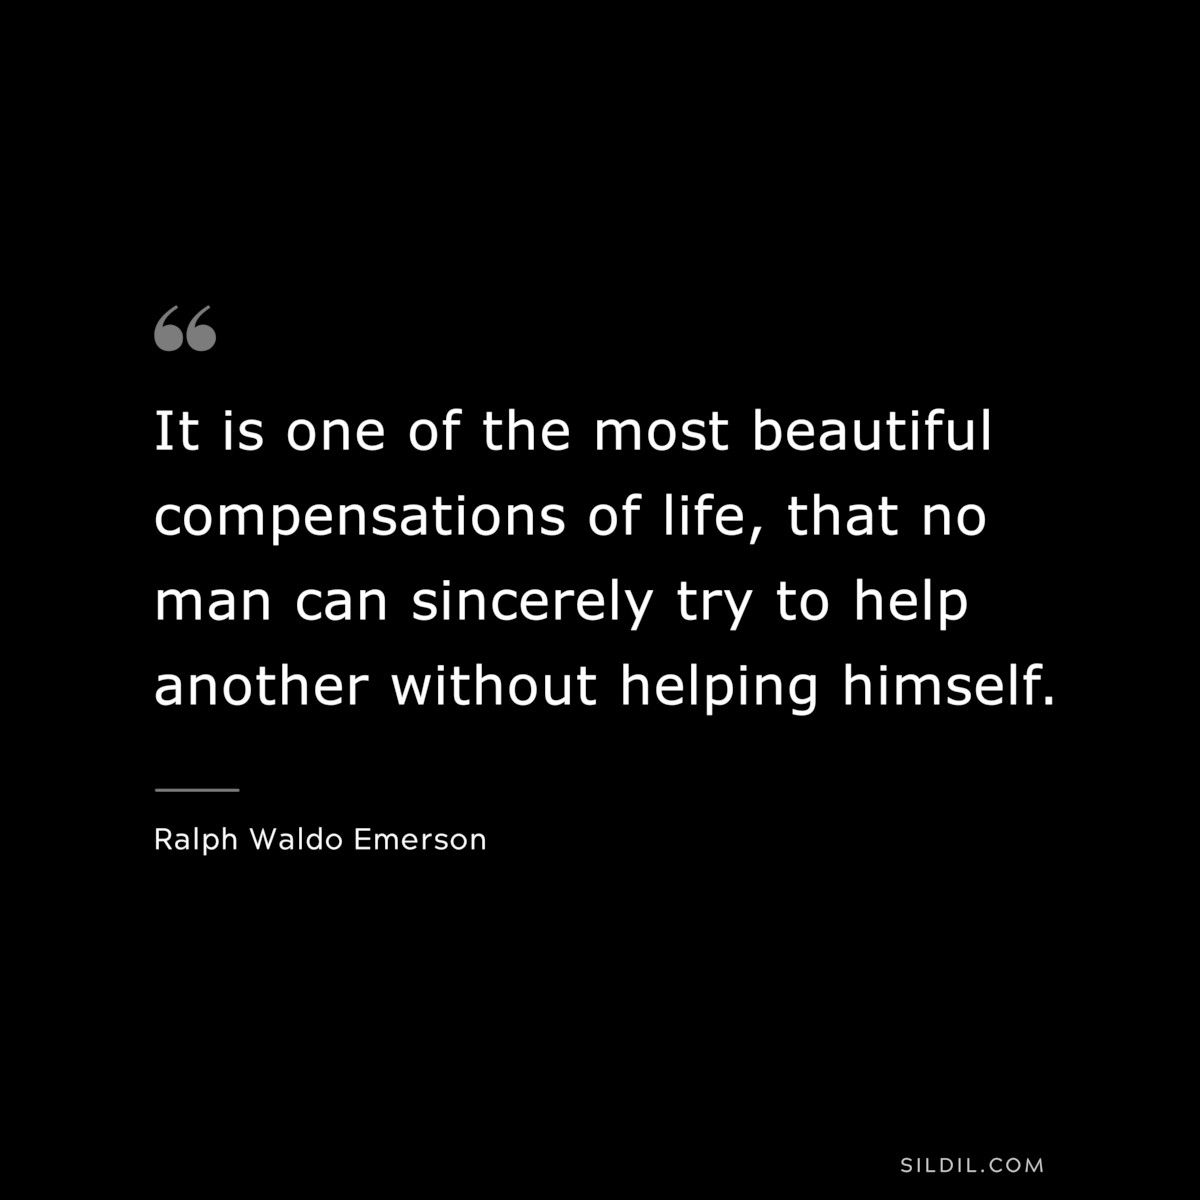 It is one of the most beautiful compensations of life, that no man can sincerely try to help another without helping himself. — Ralph Waldo Emerson